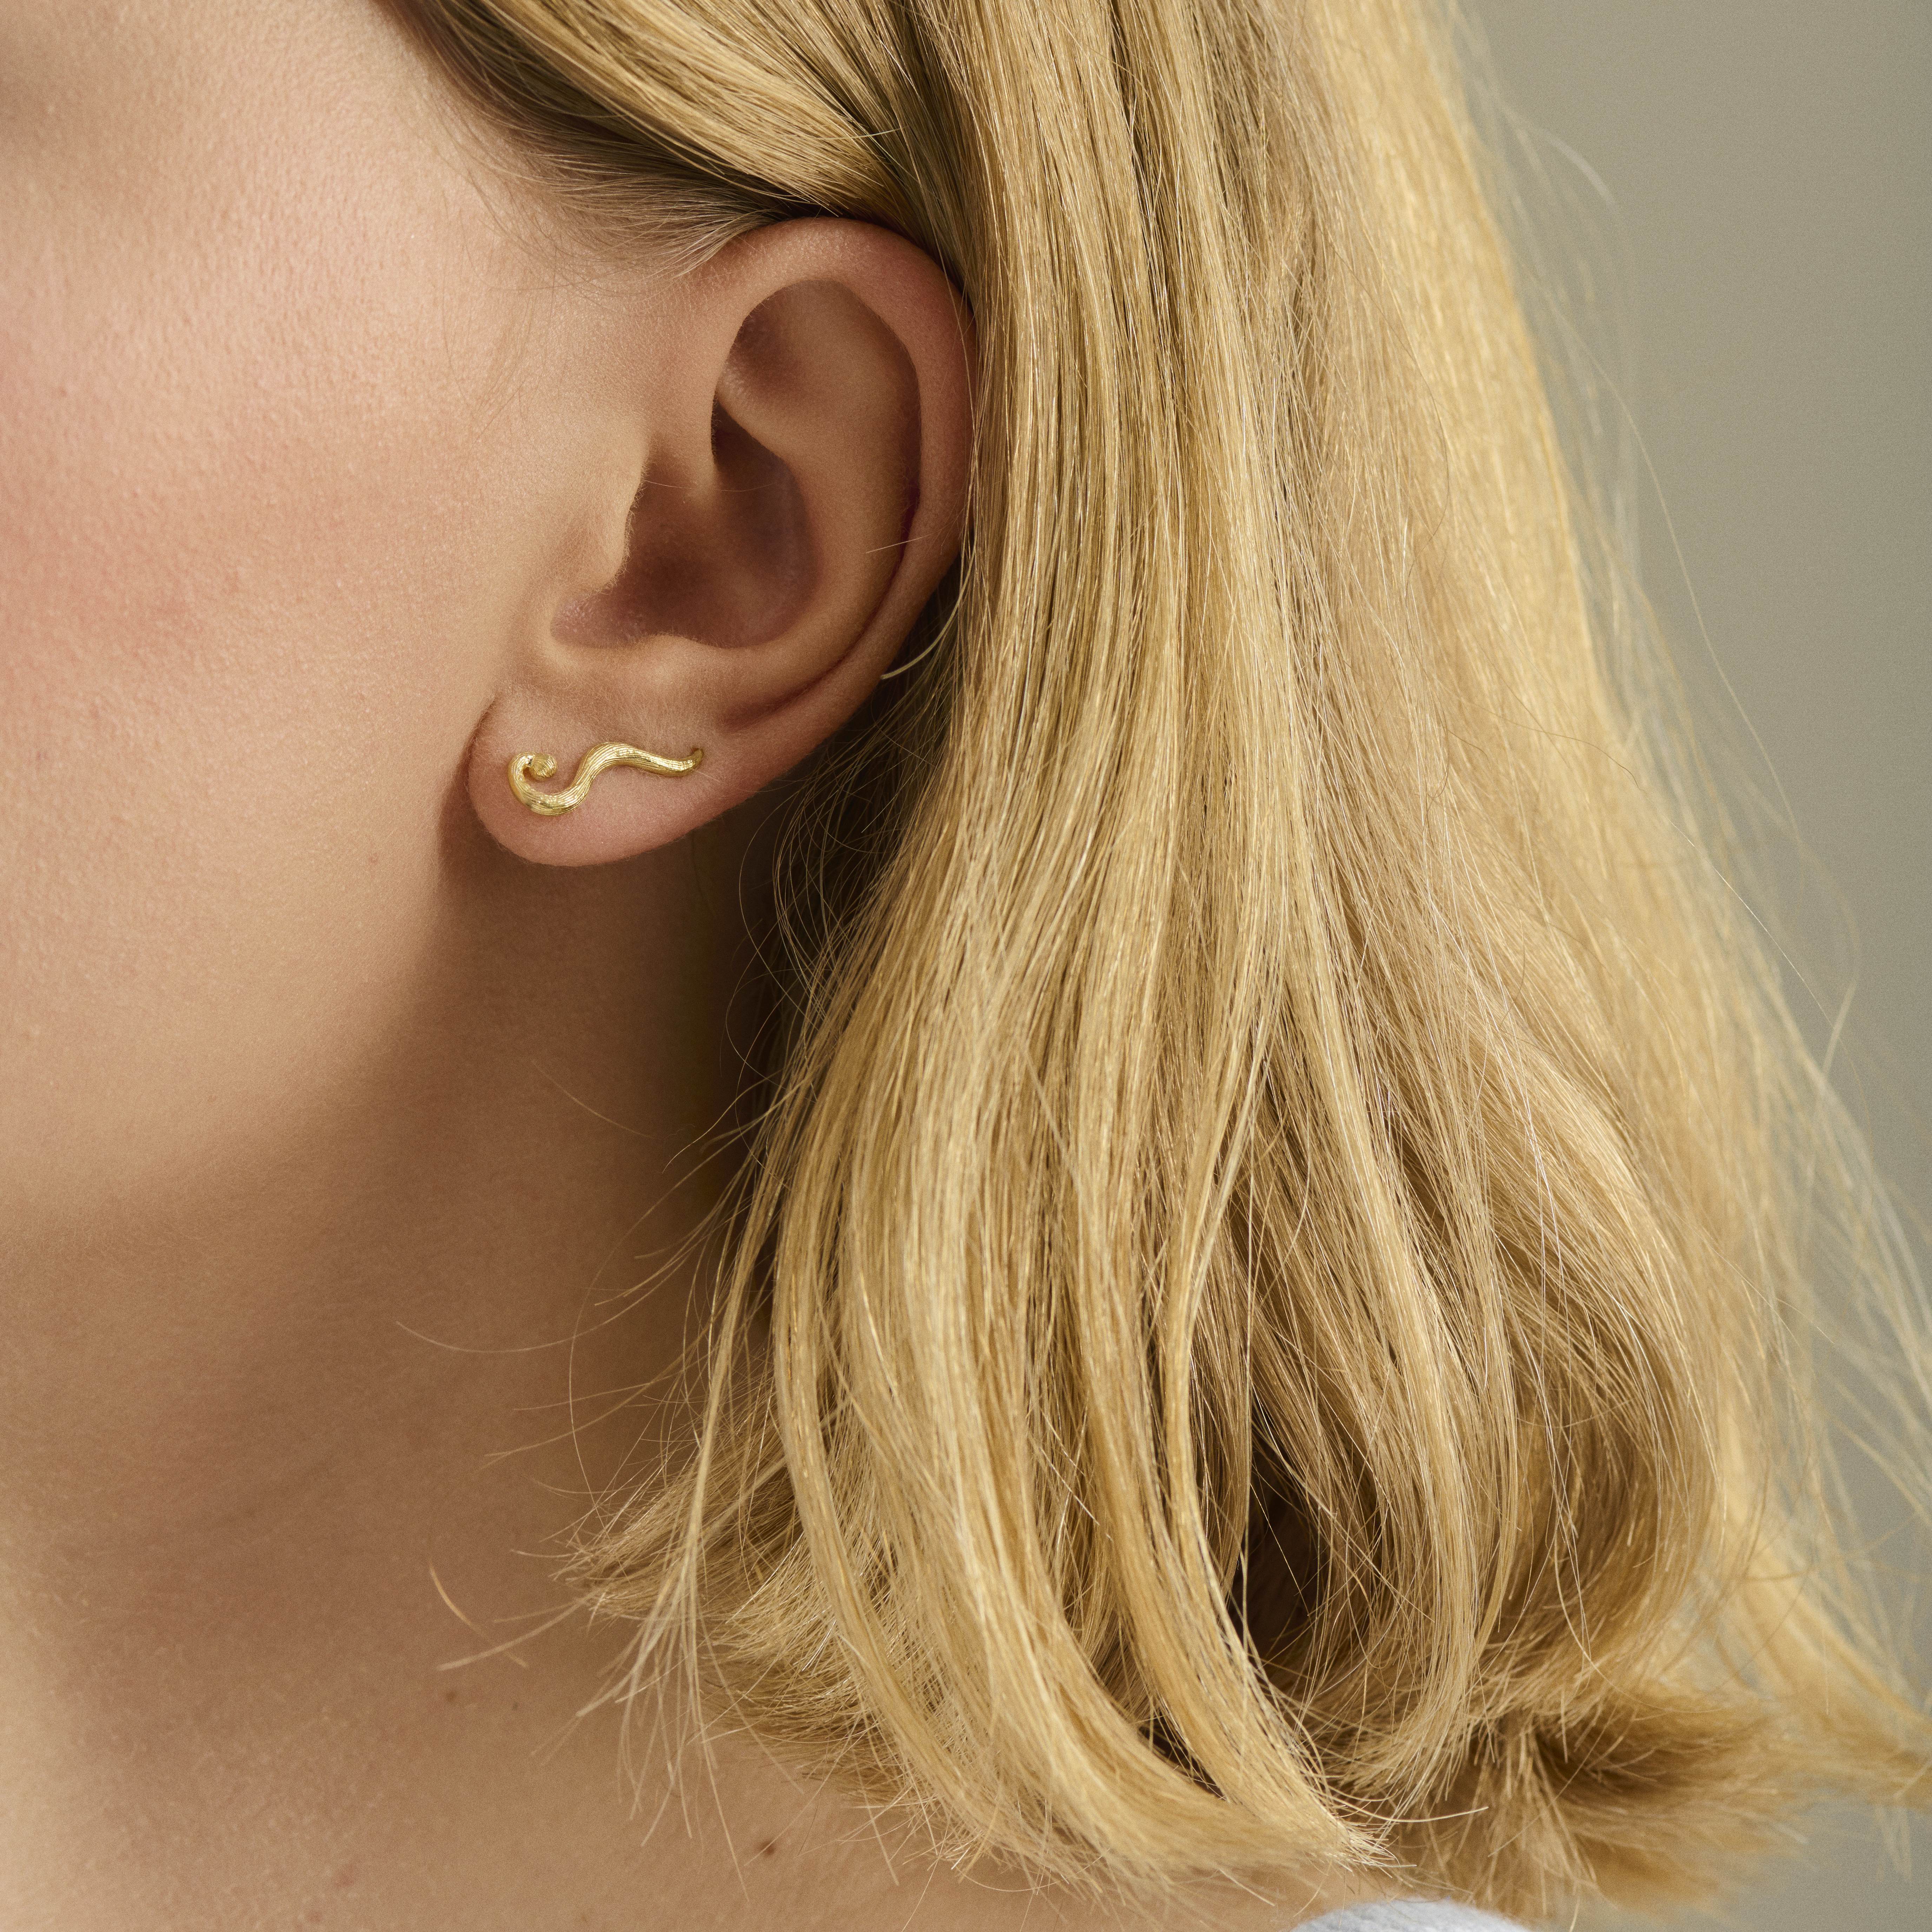 Elva Ear Climbers from Pernille Corydon in Goldplated-Silver Sterling 925